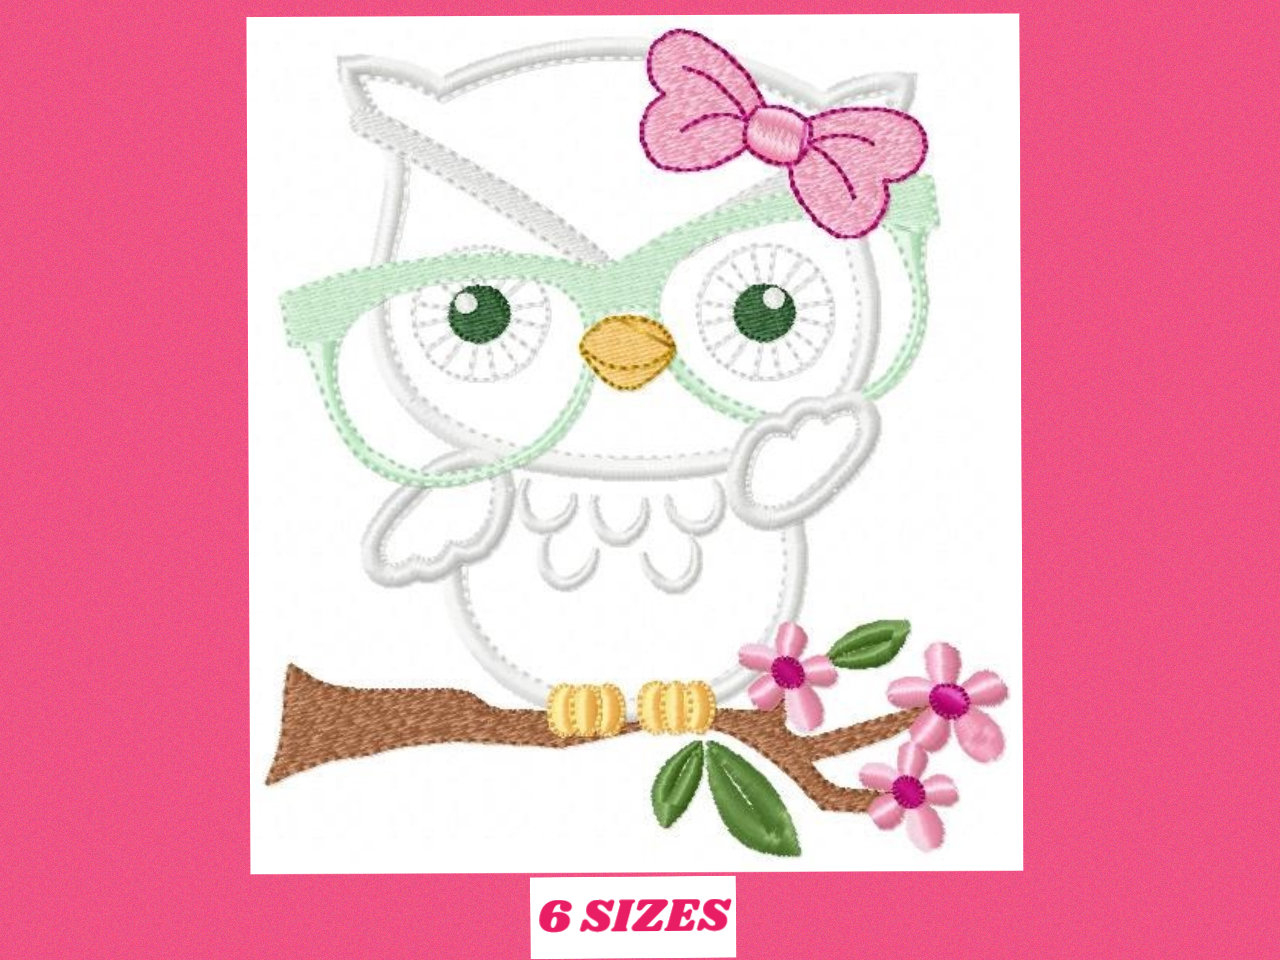 Owl Embroidery Pattern Owl Embroidery Design Owl With Glasses Embroidery Design Machine Embroidery Pattern Ba Embroidery File Bird Embroidery Owl Applique Design